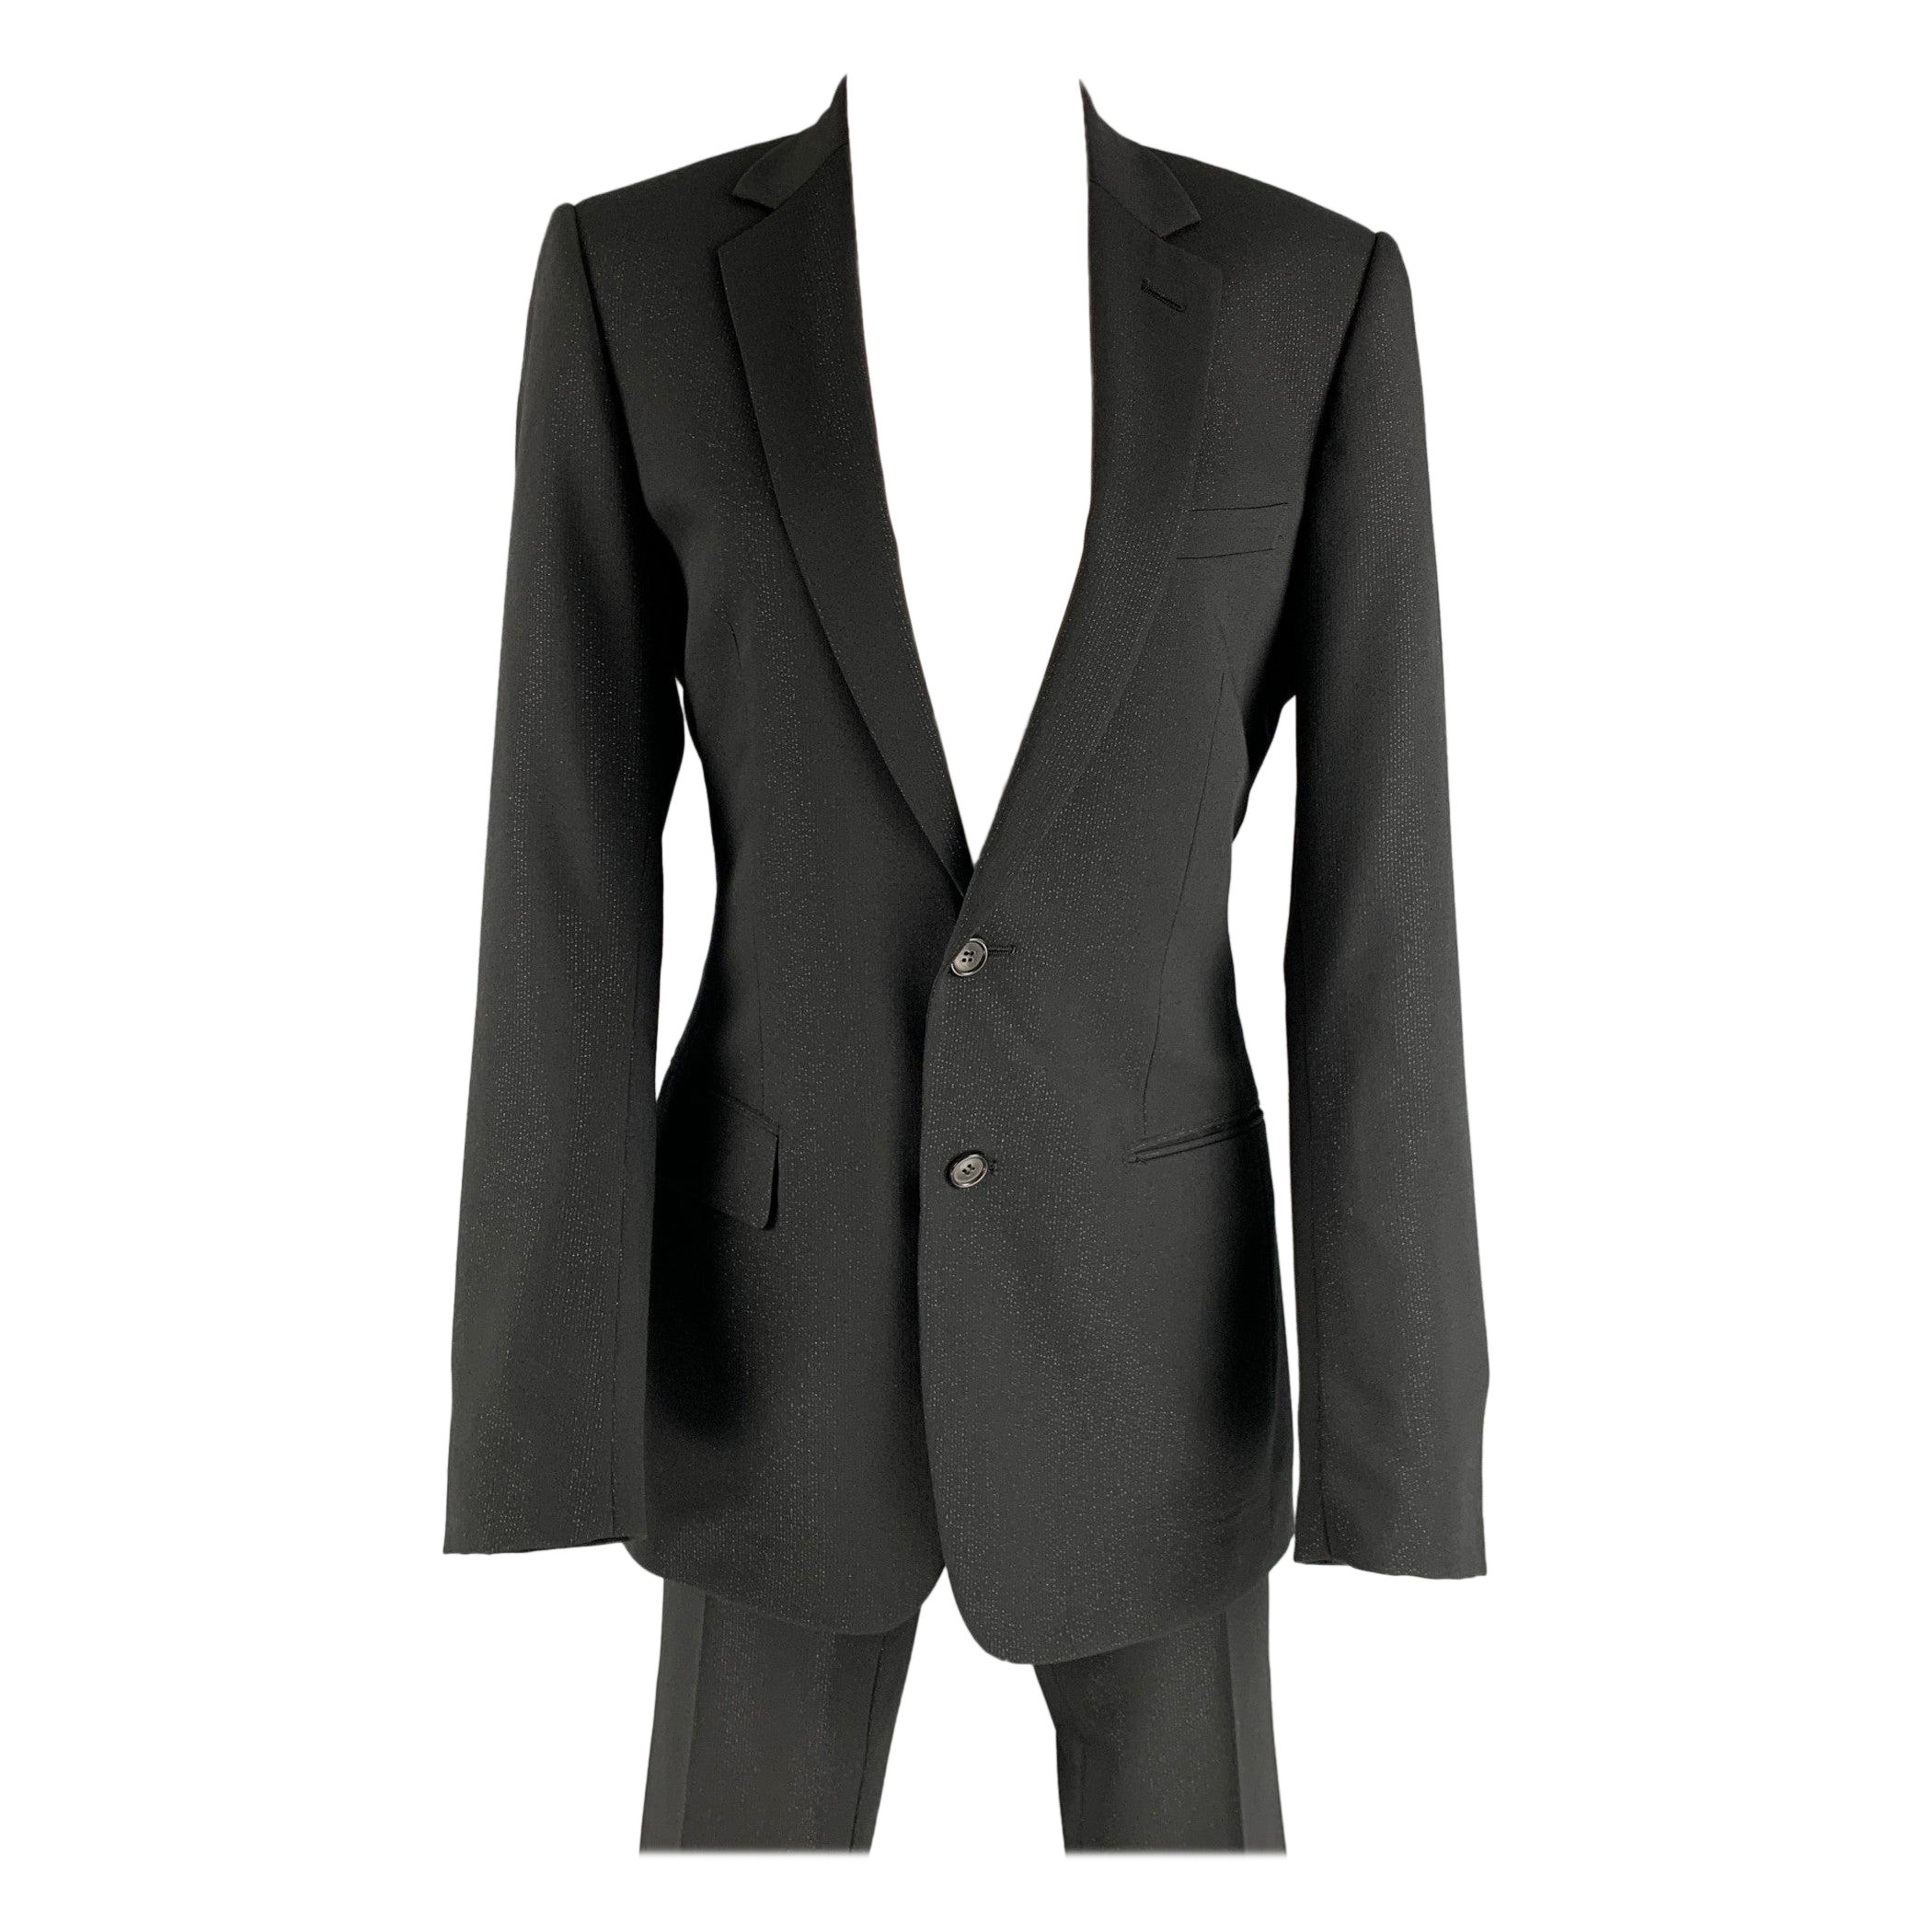 CHRISTIAN DIOR Size 36 Black Silver Shimmery Polyester Blend Suit For Sale